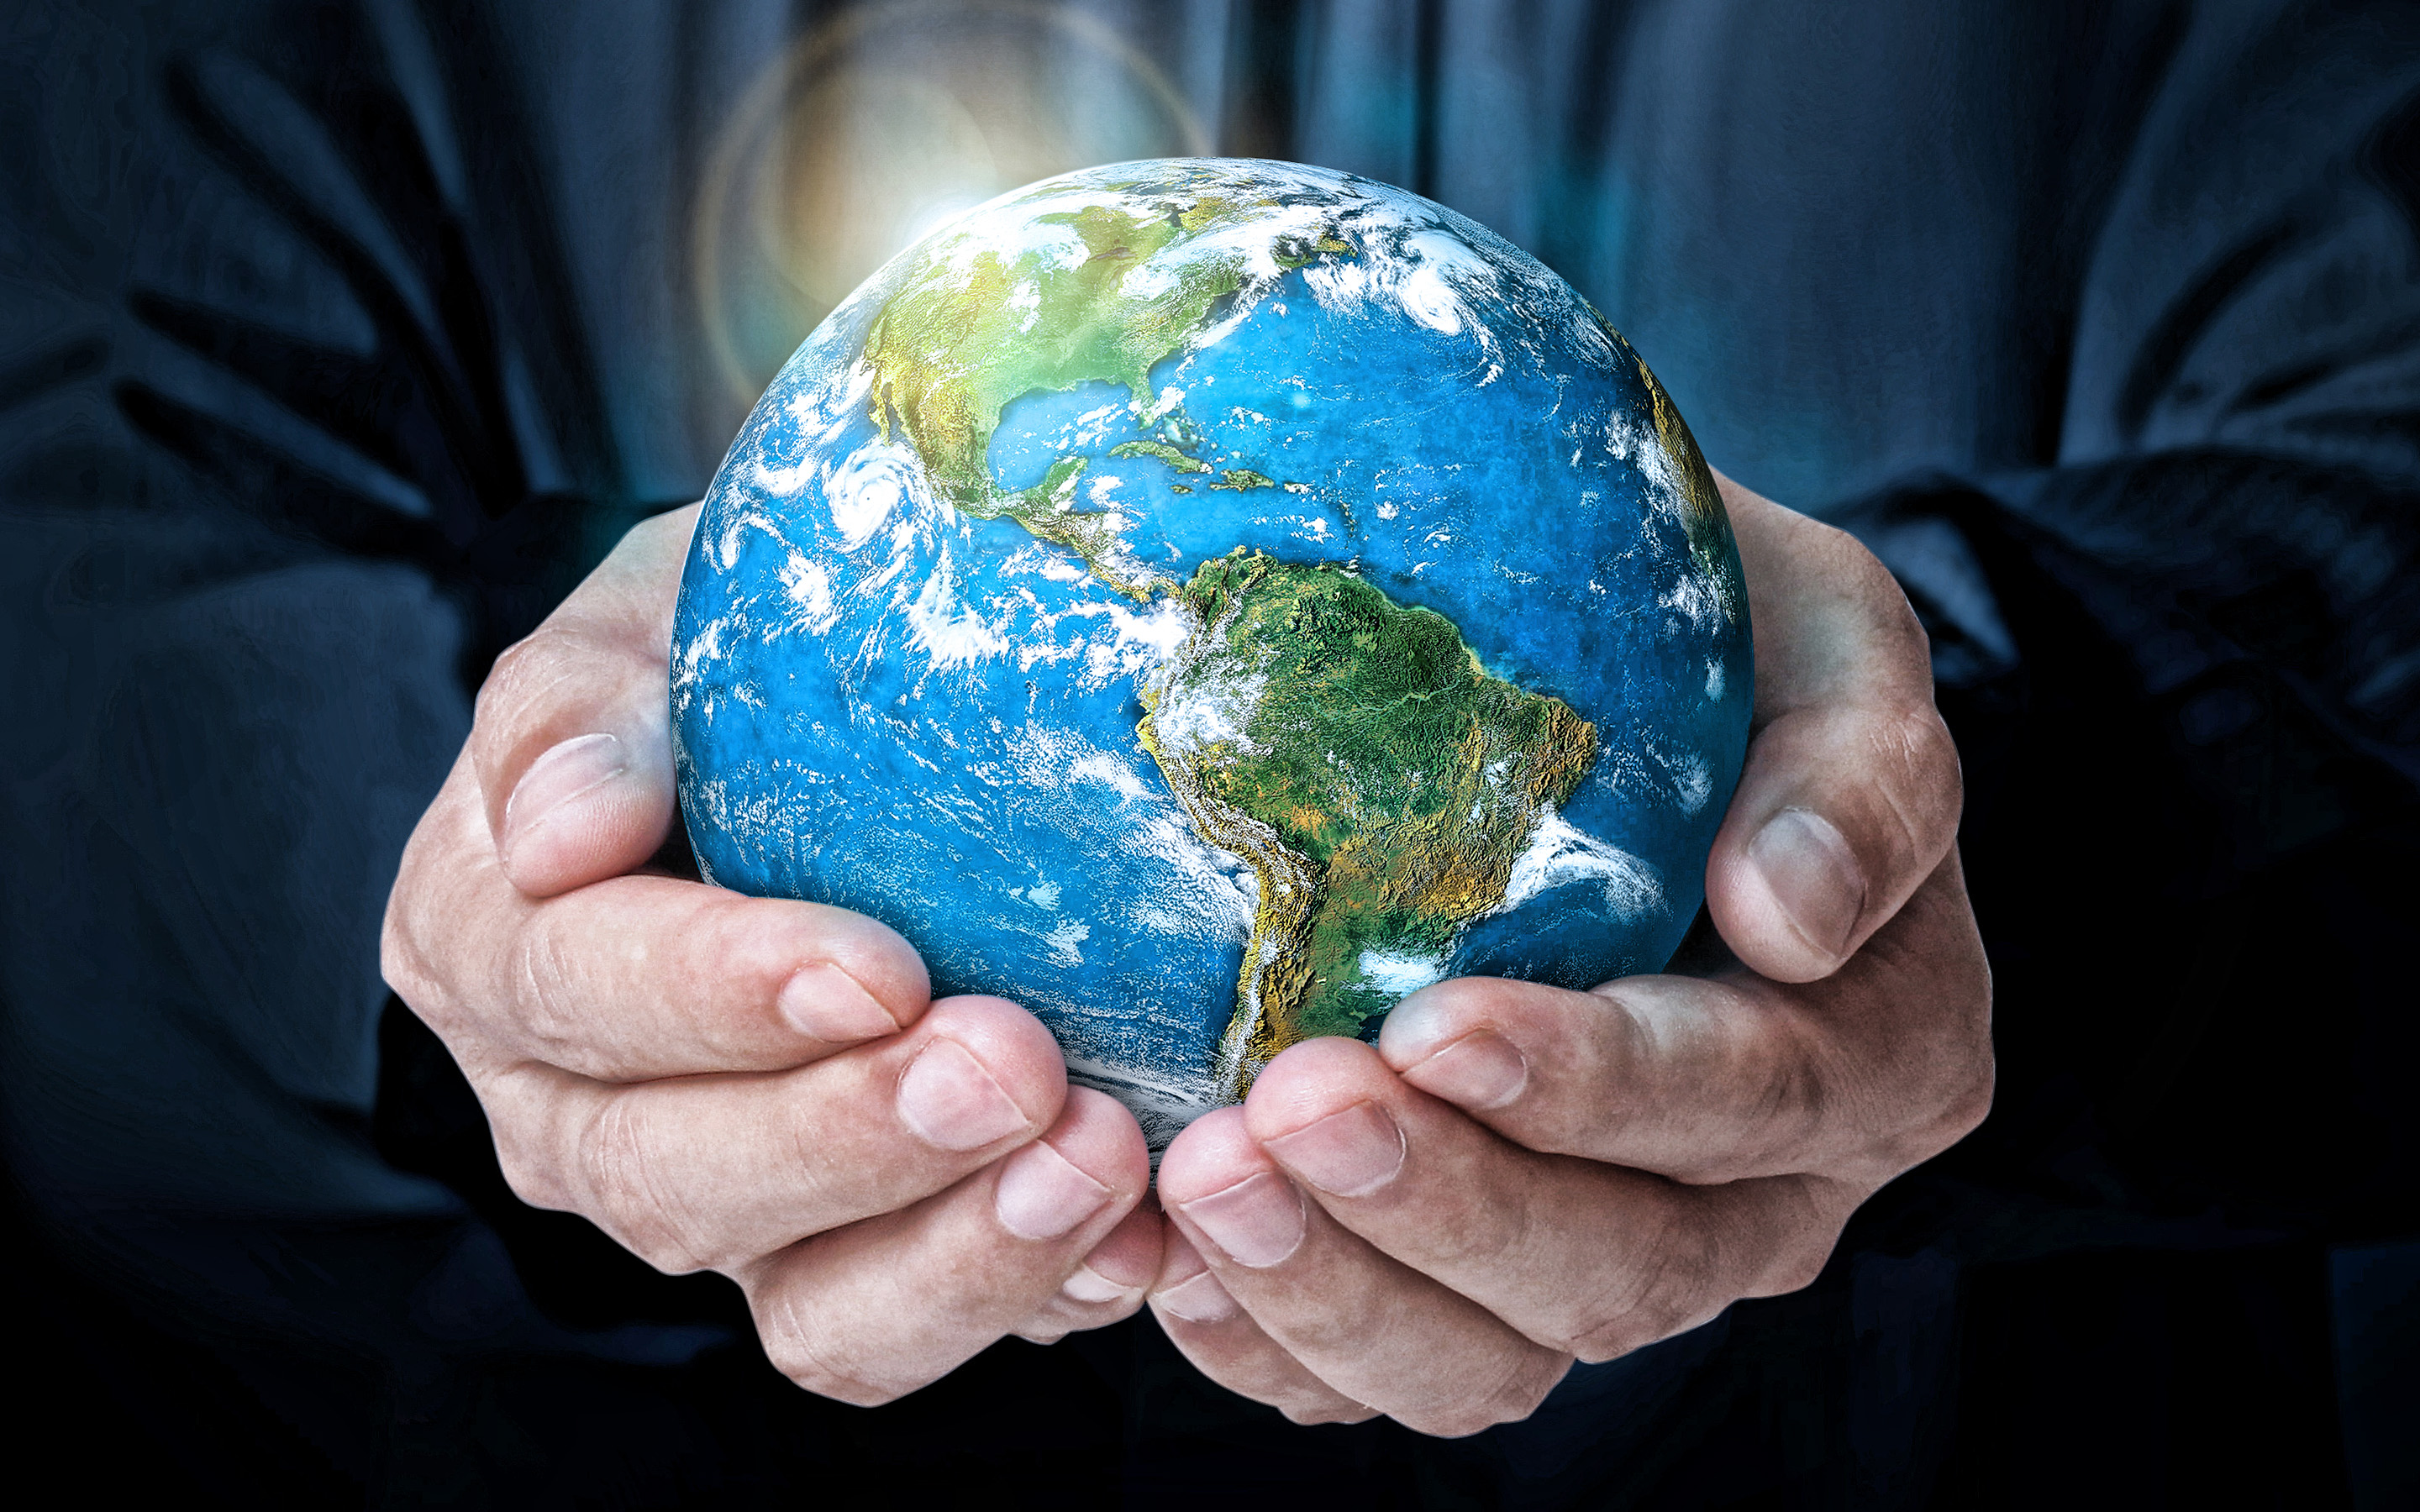 Download wallpaper Earth in the hands, North America on the globe, South America on the globe, continents, save the planet, save Earth, environment, ecology concepts, Earth for desktop with resolution 2880x1800. High